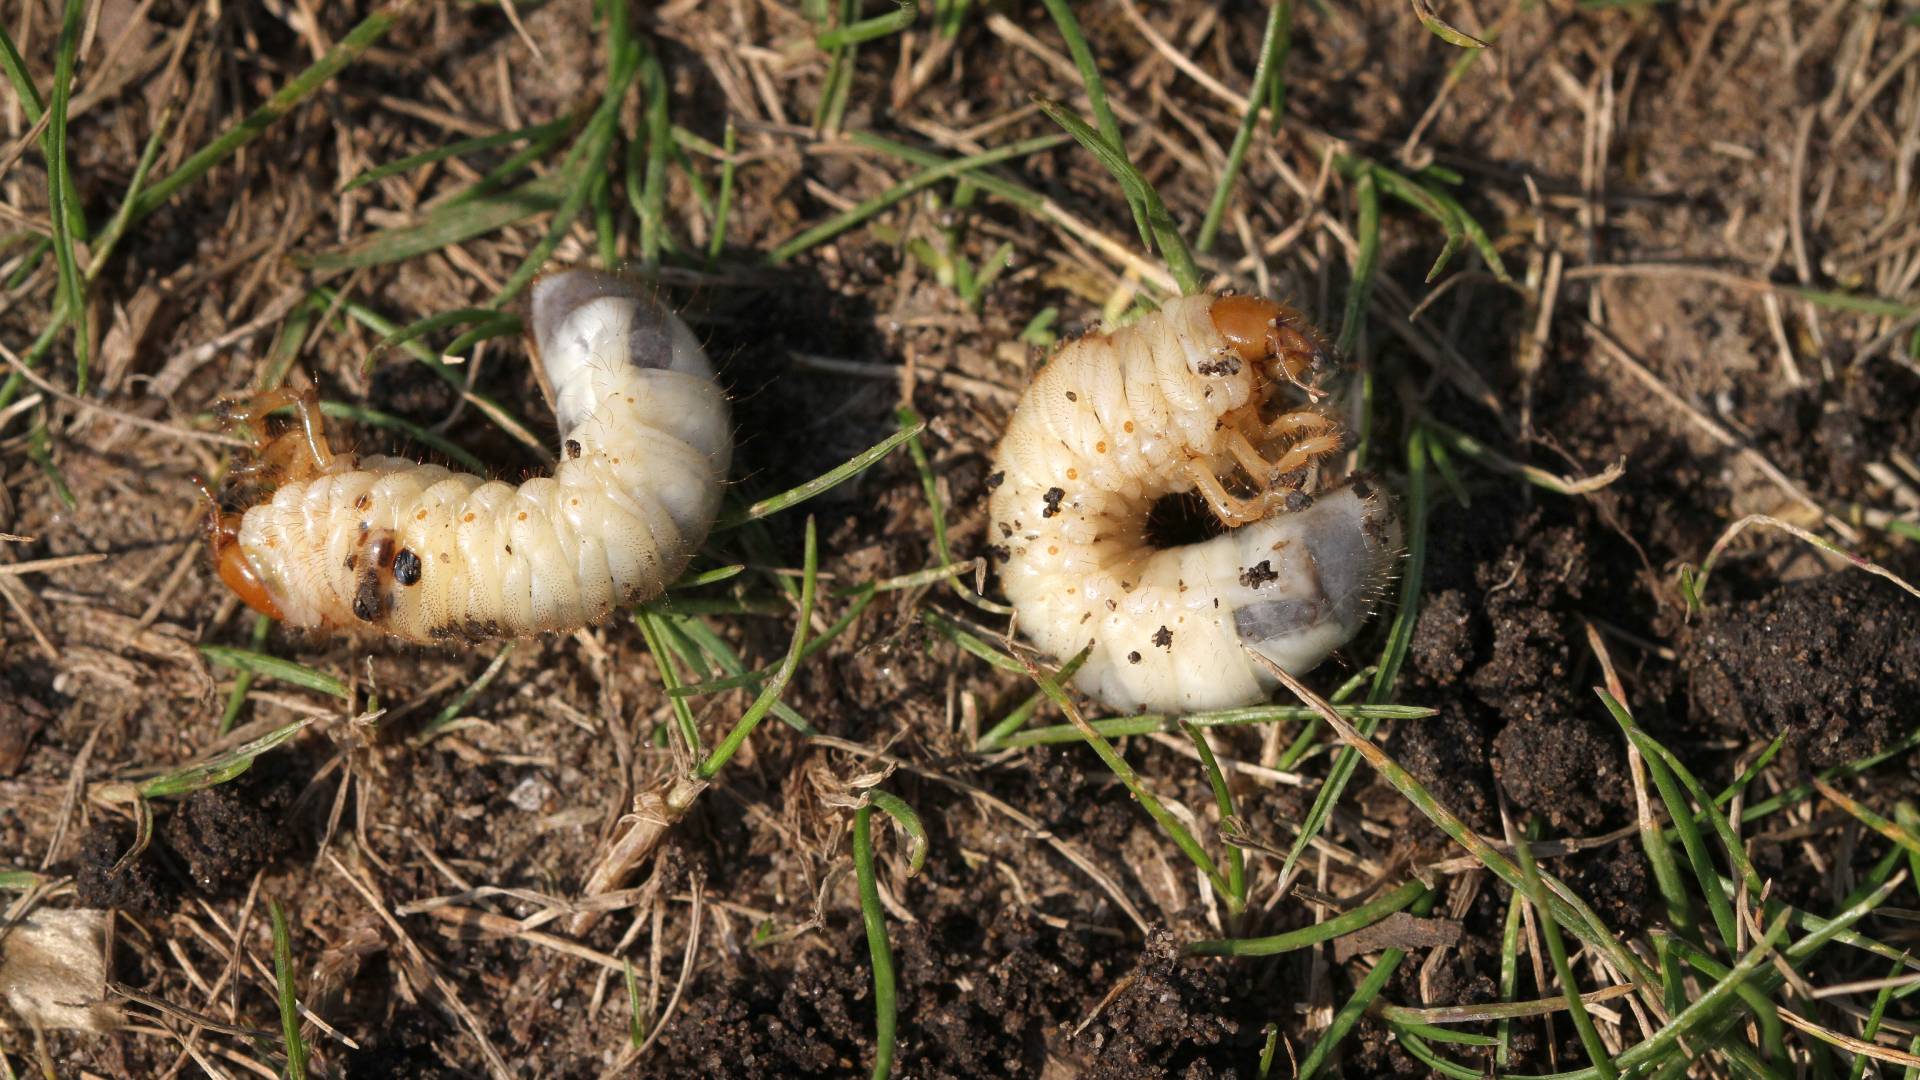 Grubs found in lawn in West Chester, PA.